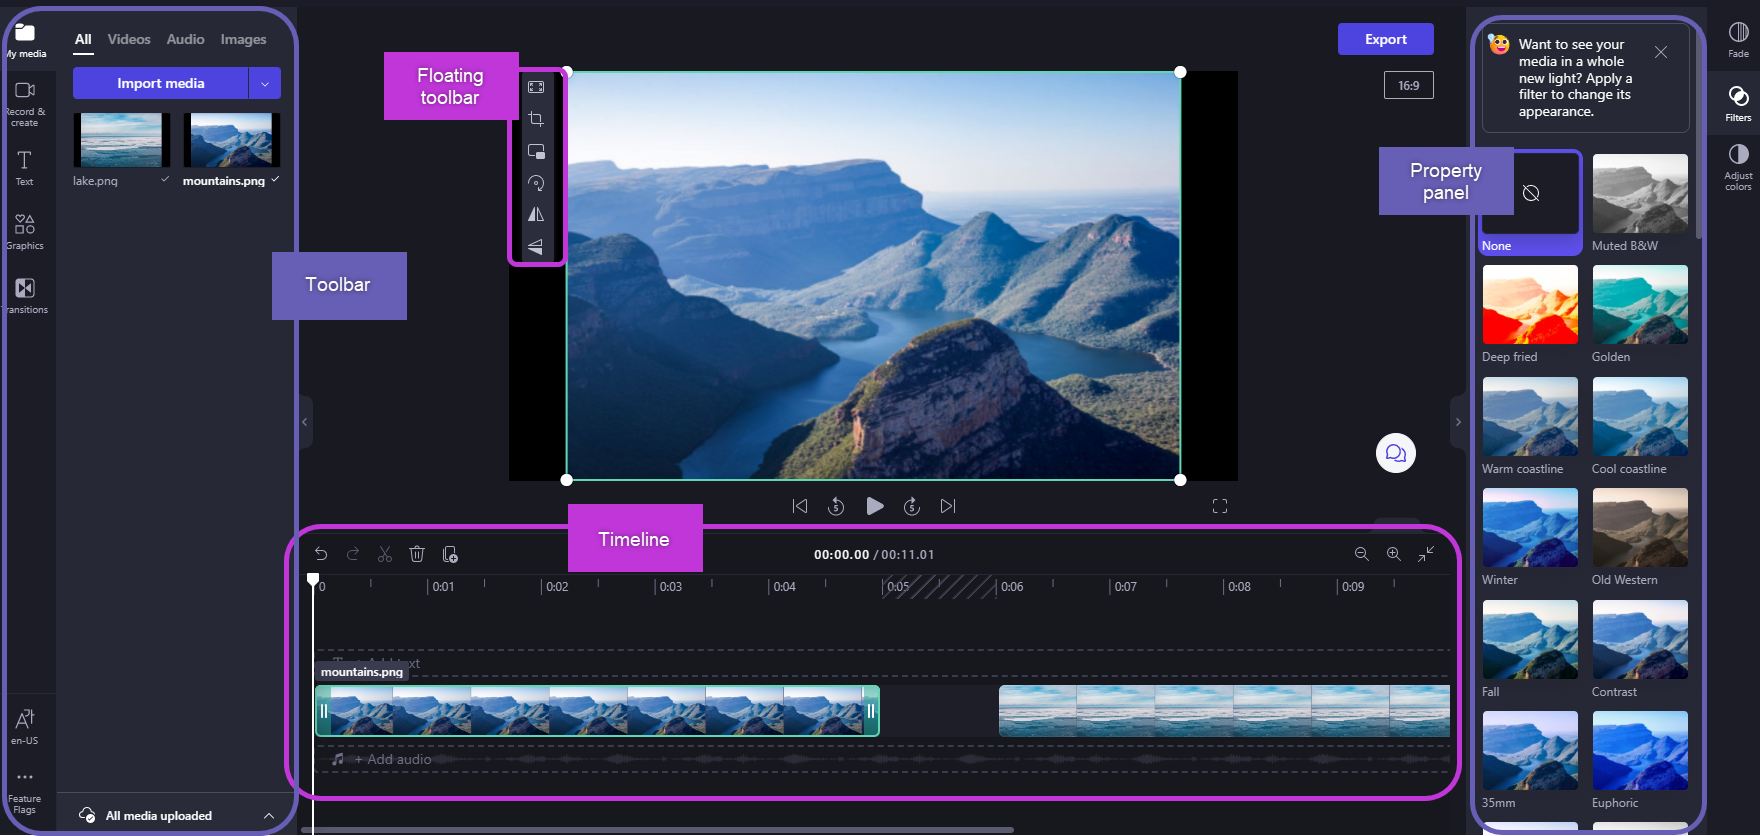 The different sections of the user interface of Clipchamp's video editor